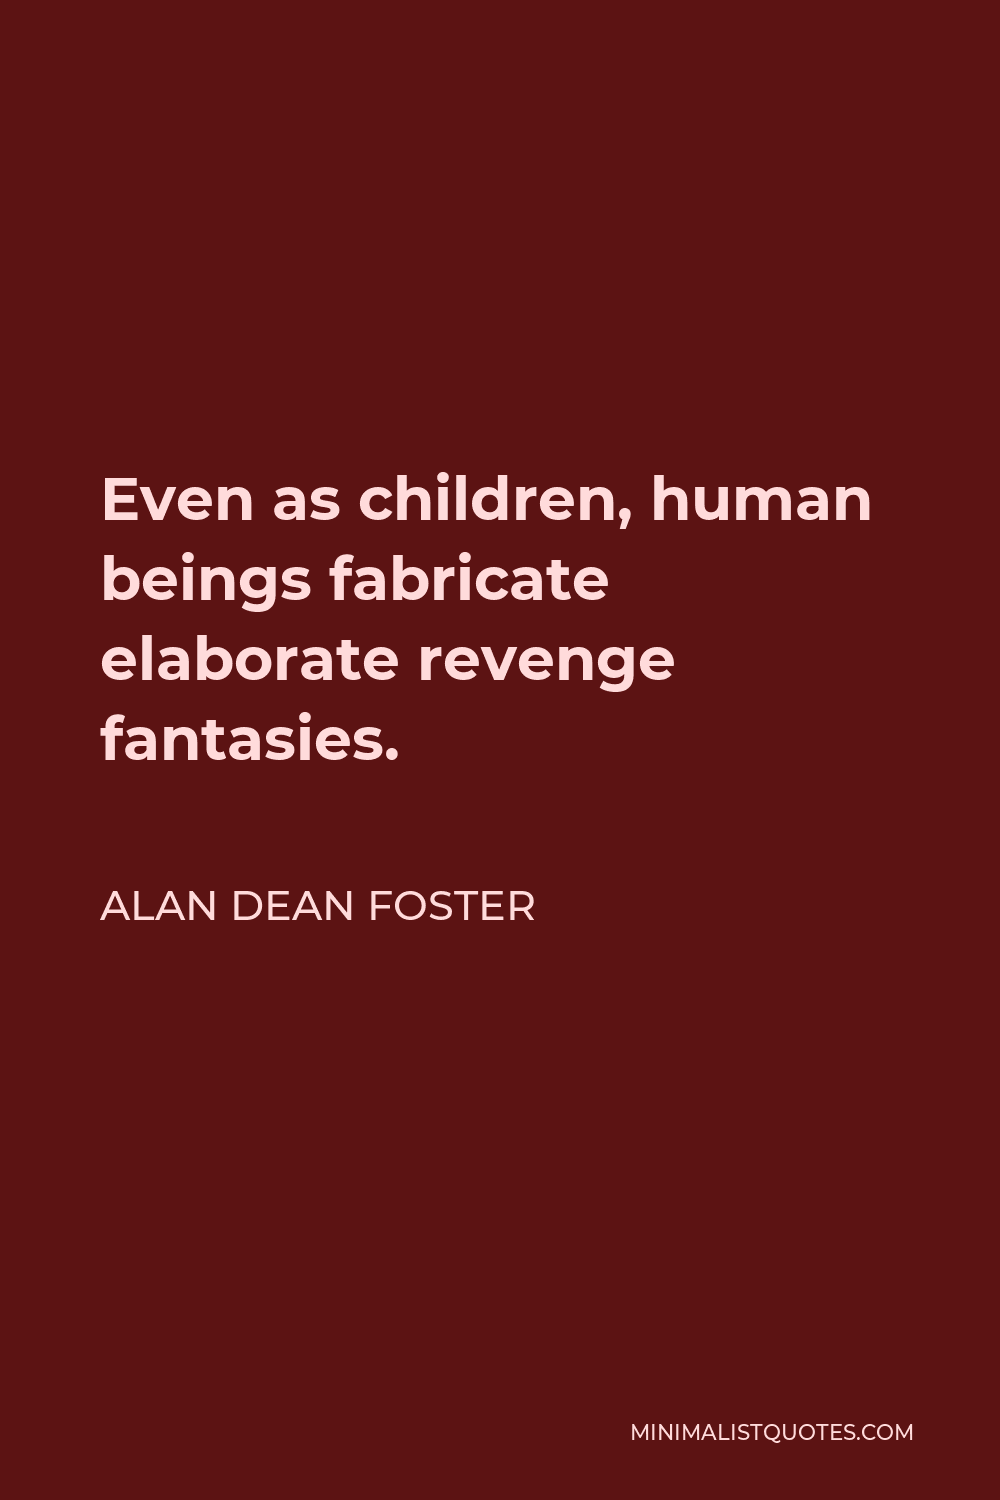 Alan Dean Foster Quote - Even as children, human beings fabricate elaborate revenge fantasies.